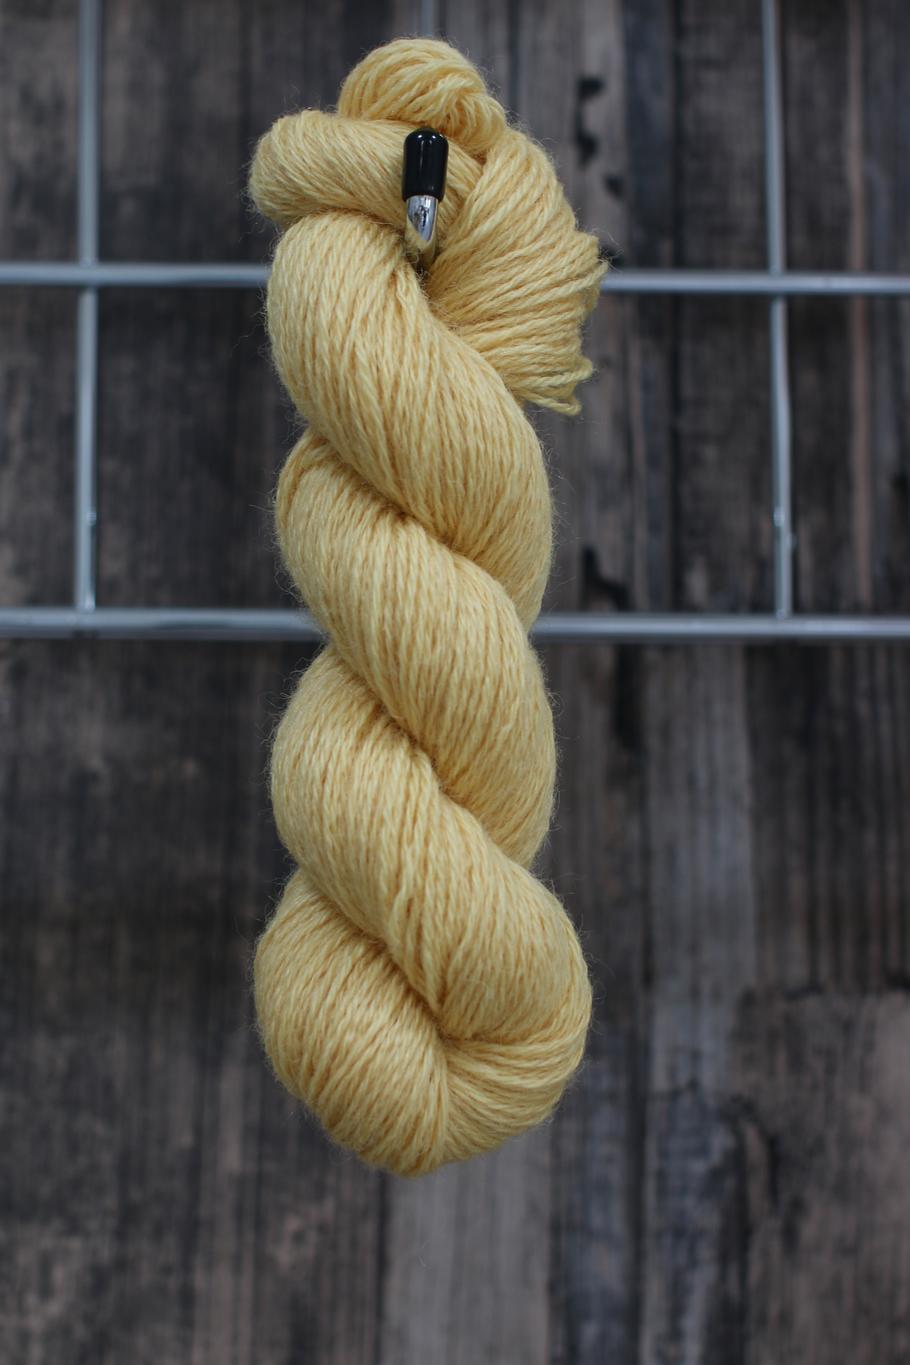 A soft yellow skein of wool hanging from a hook